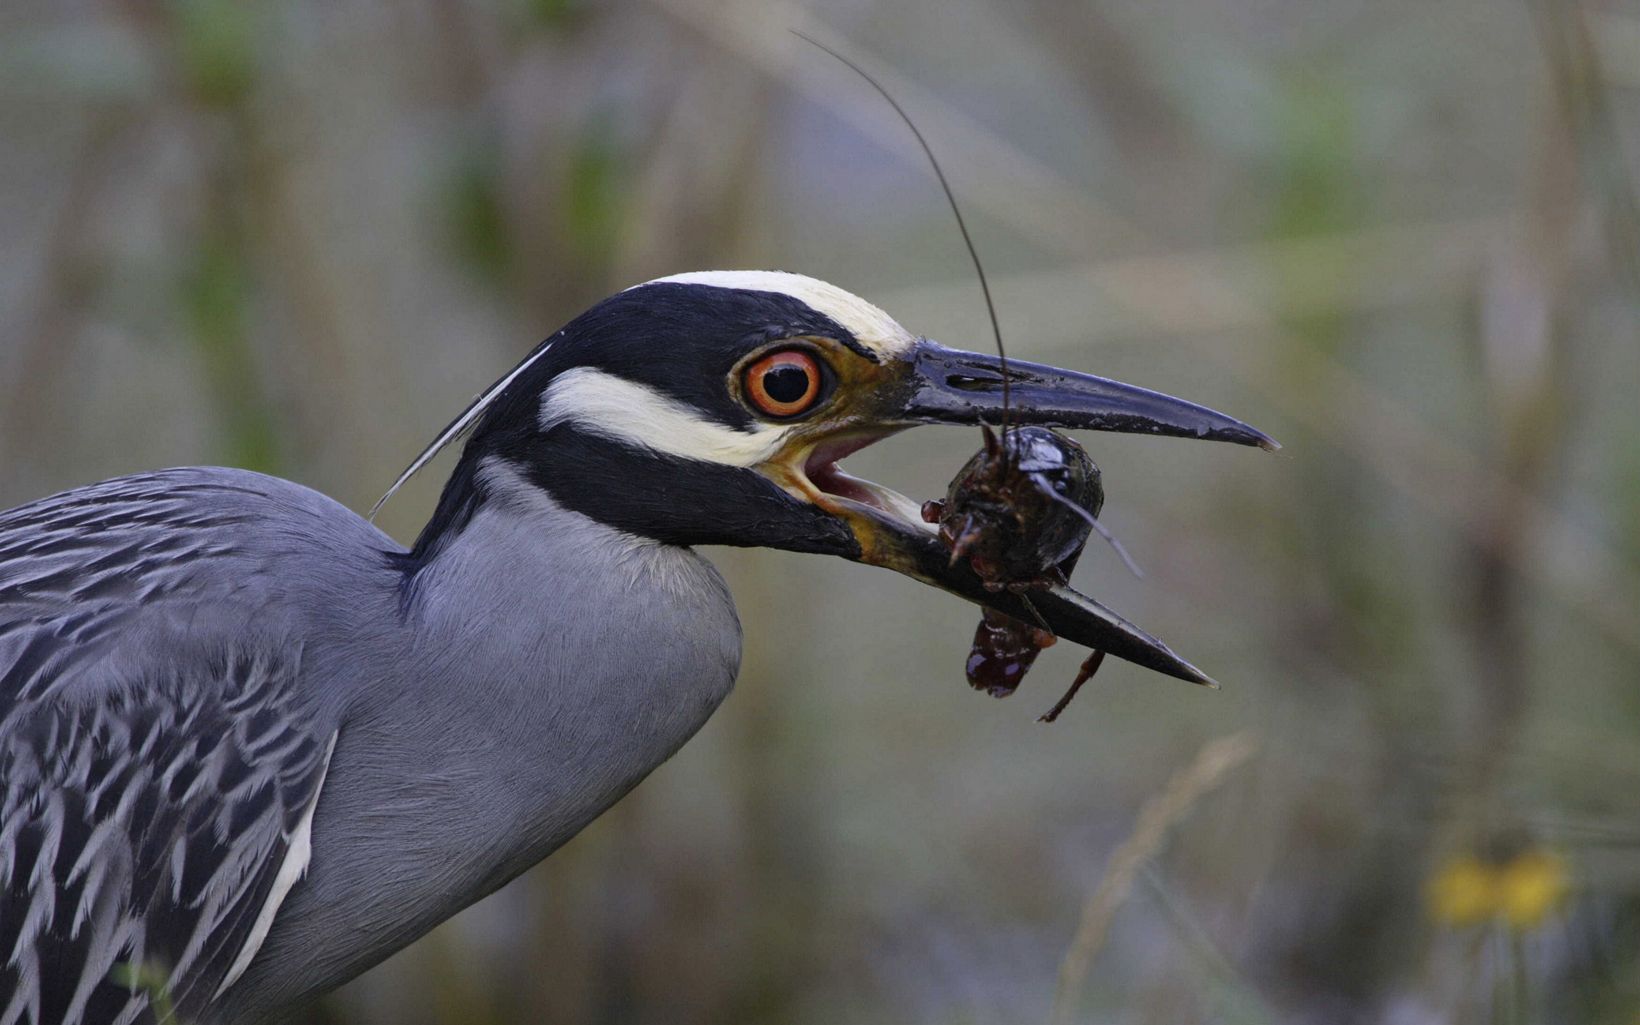 A bird with a black-and-white head holds an crawfish in his mouth.